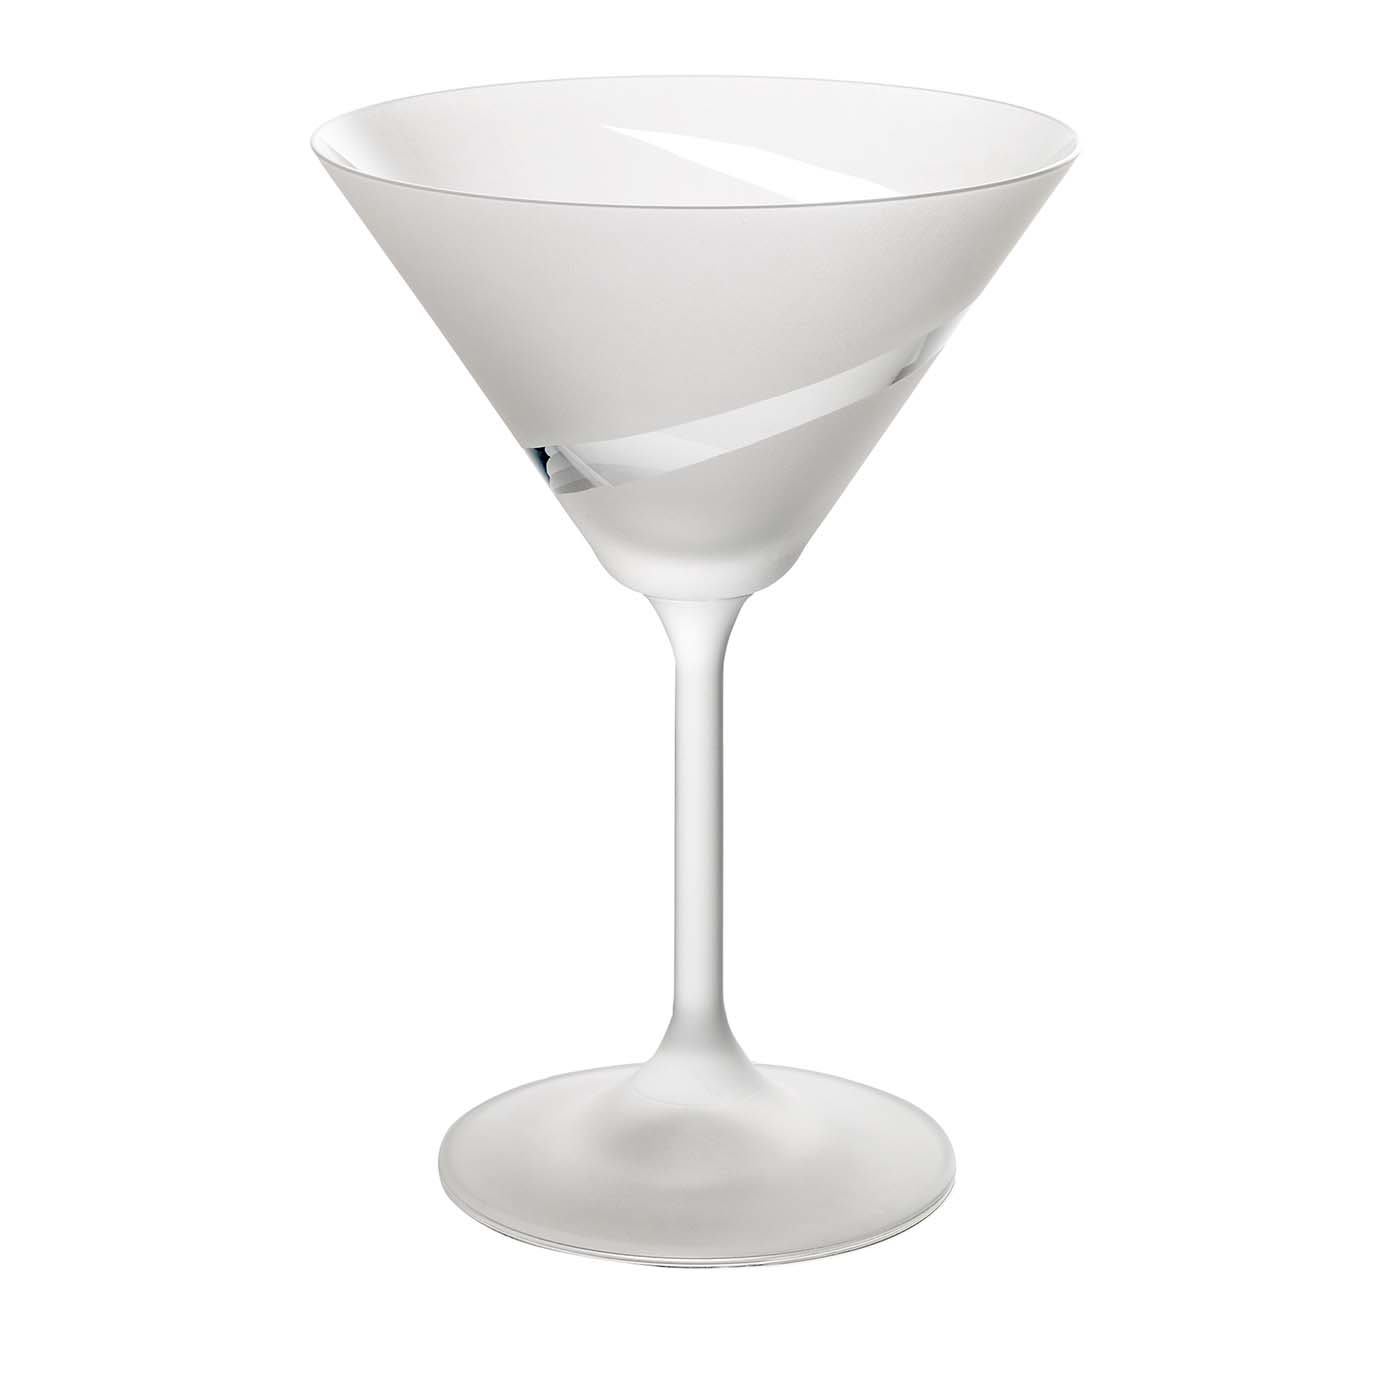 Set of 2 Bartender's Signature Frosted Martini Glasses by Alessandro Palazzi - IVV - Industria Vetraria Valdarnese